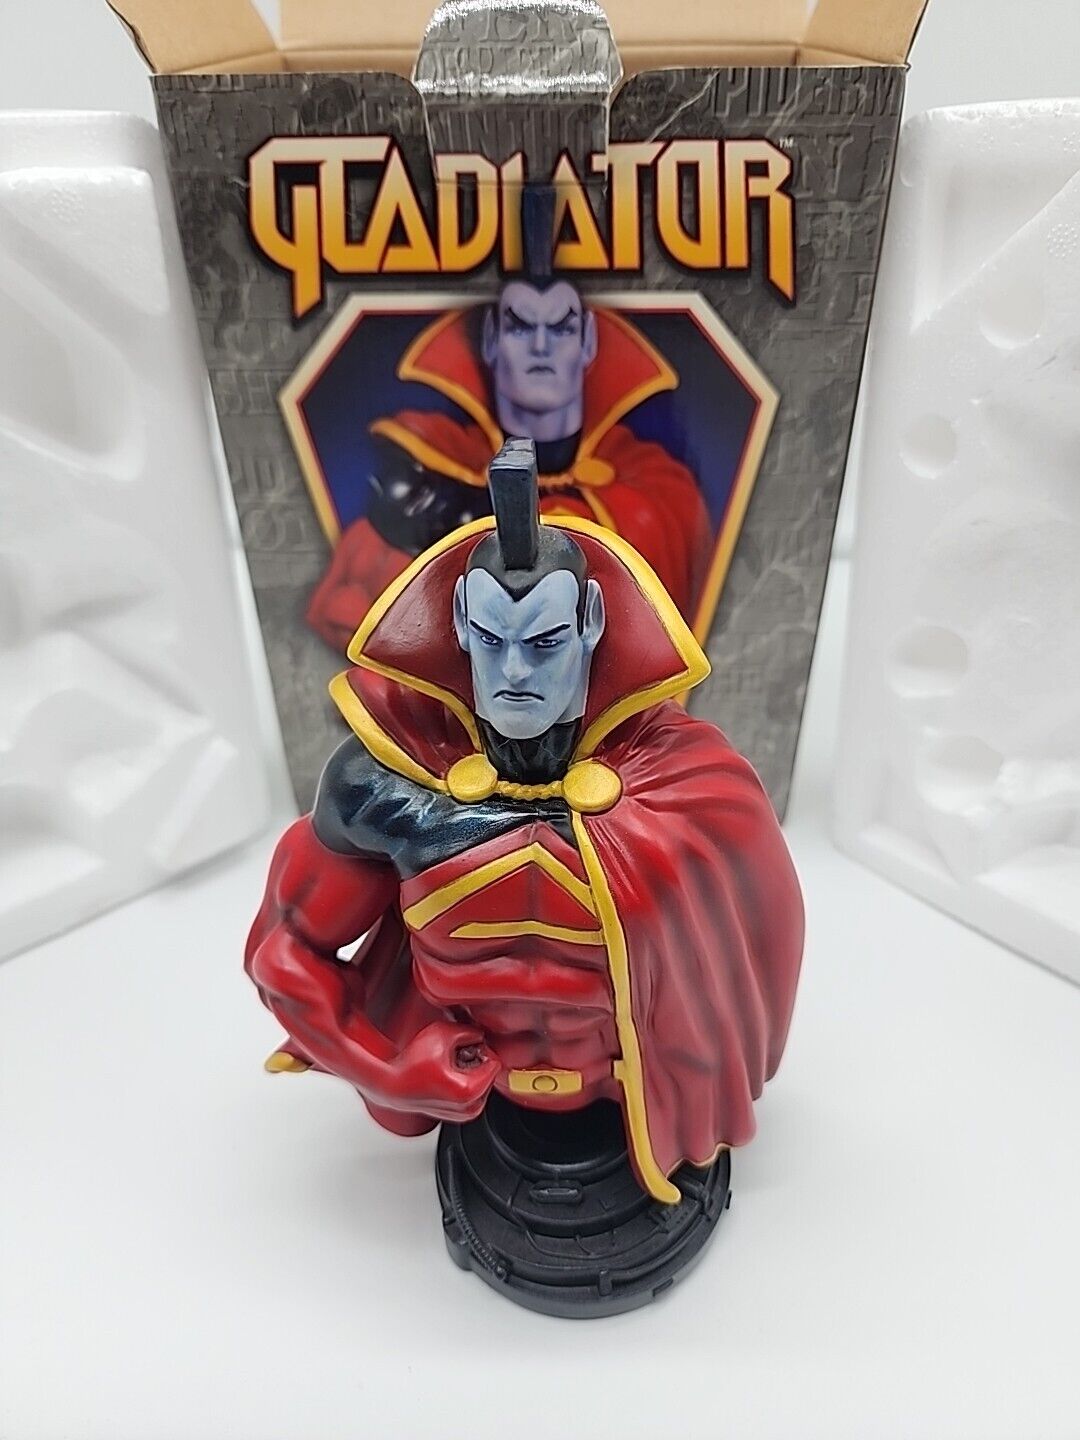 GLADIATOR MARVEL MINI-BUST BOWEN DESIGNS Limited Edition LE of 2000 NEW BOX 2006